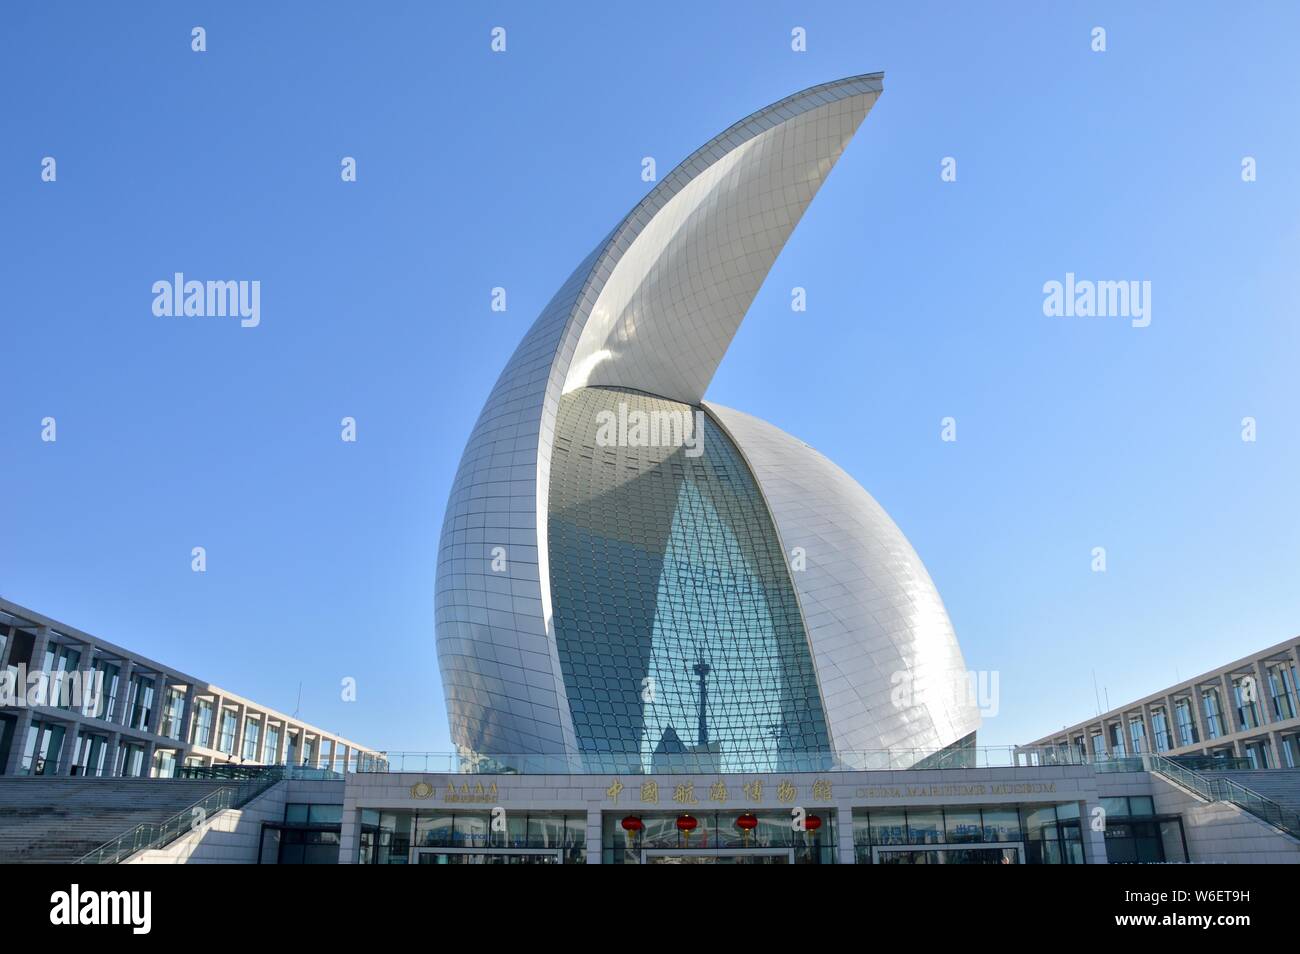 five star attraction: Maritime Museum China Stock Photo